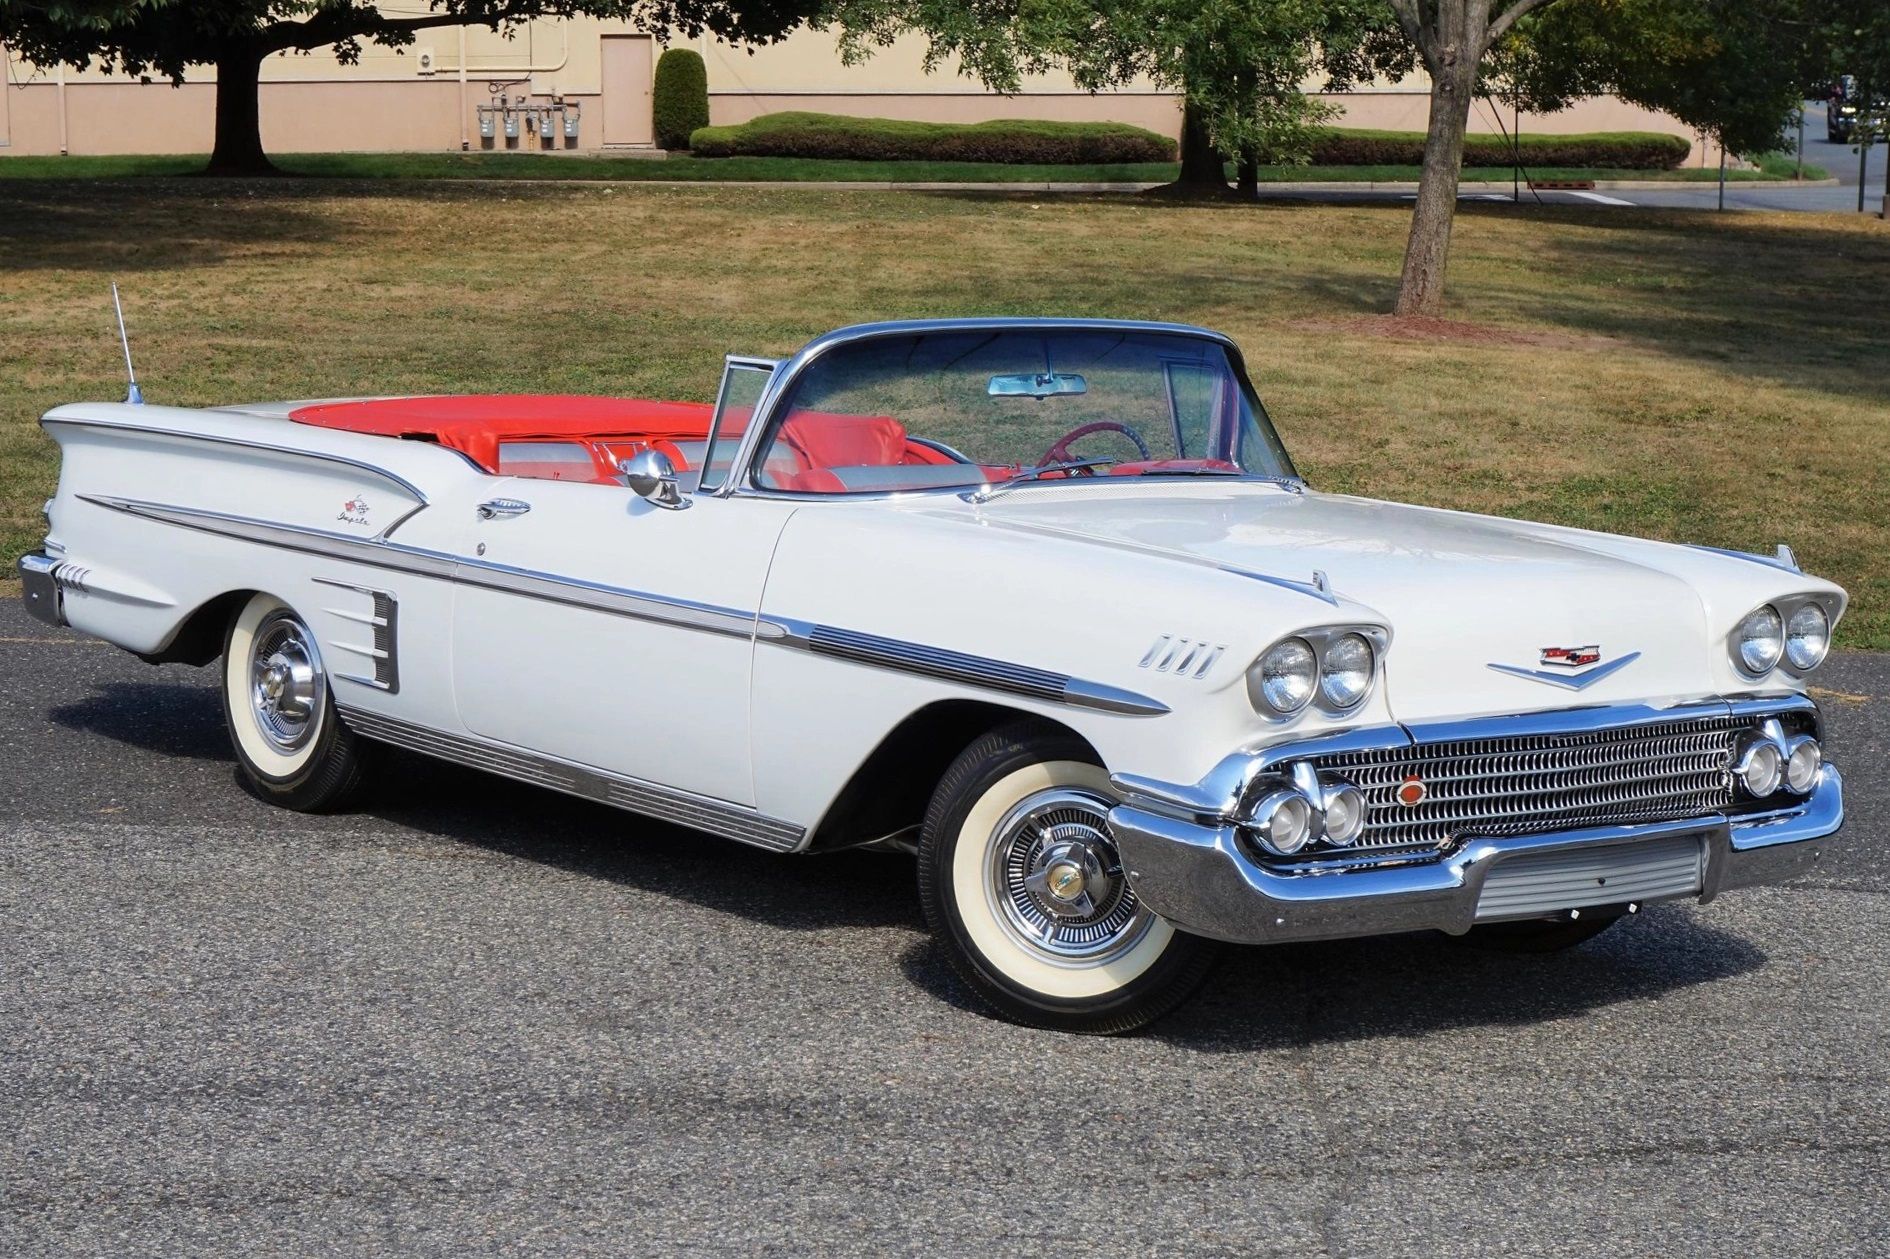 A parked white 1958 Chevy Impala Convertible